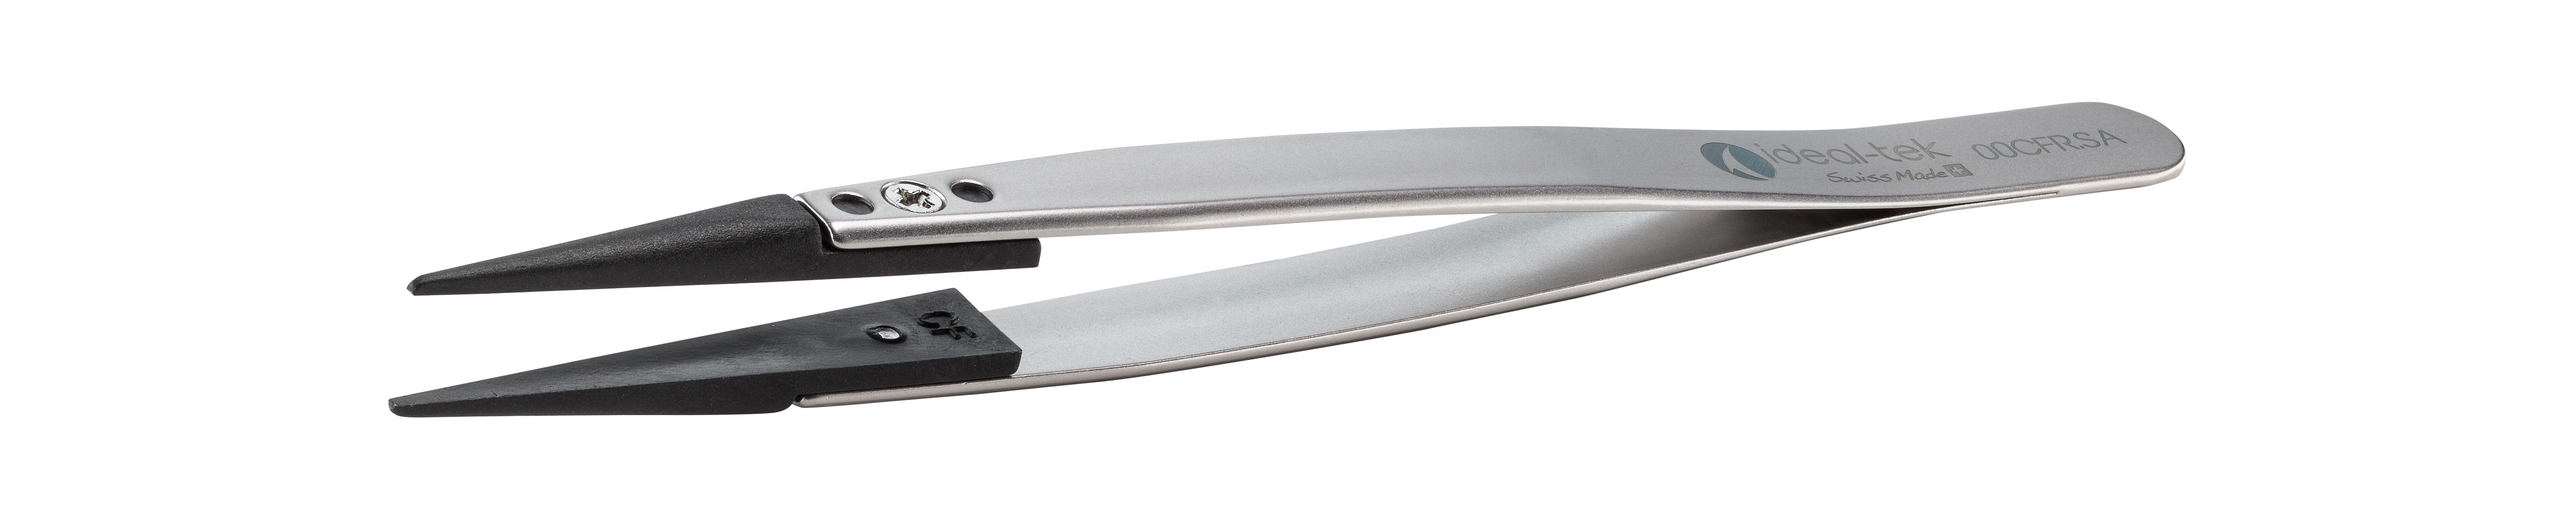 EOD Stainless Ceramic Tweezers - Ideal Supply Inc (dba Ideal